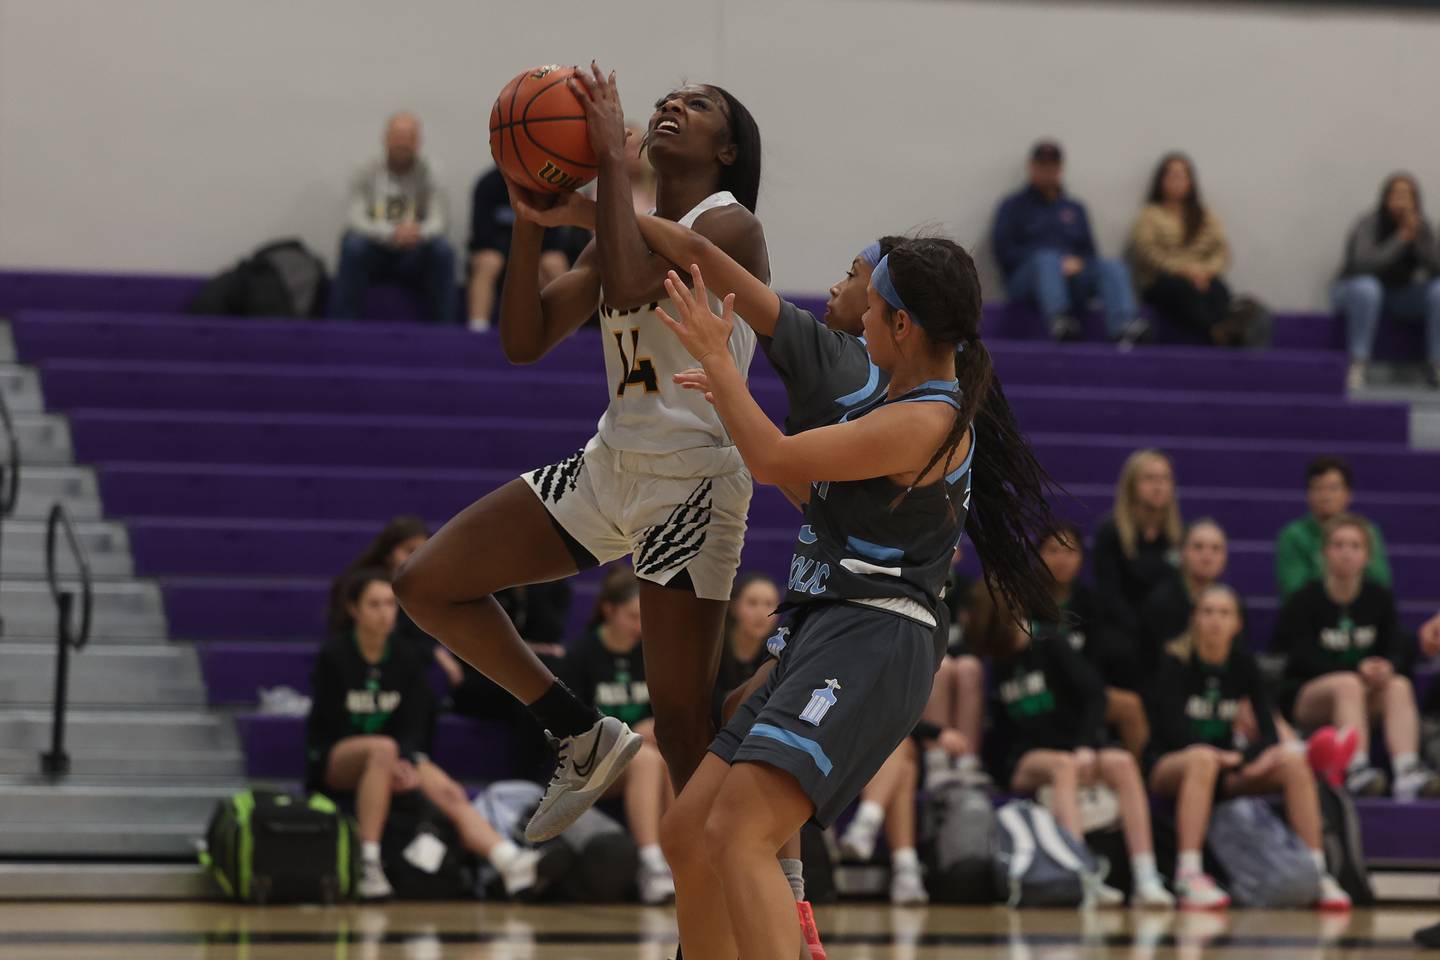 Joliet West’s Destiny McNair draws the foul going for the basket against Joliet Catholic in the WJOL Basketball Tournament at Joliet Junior College Event Center on Monday